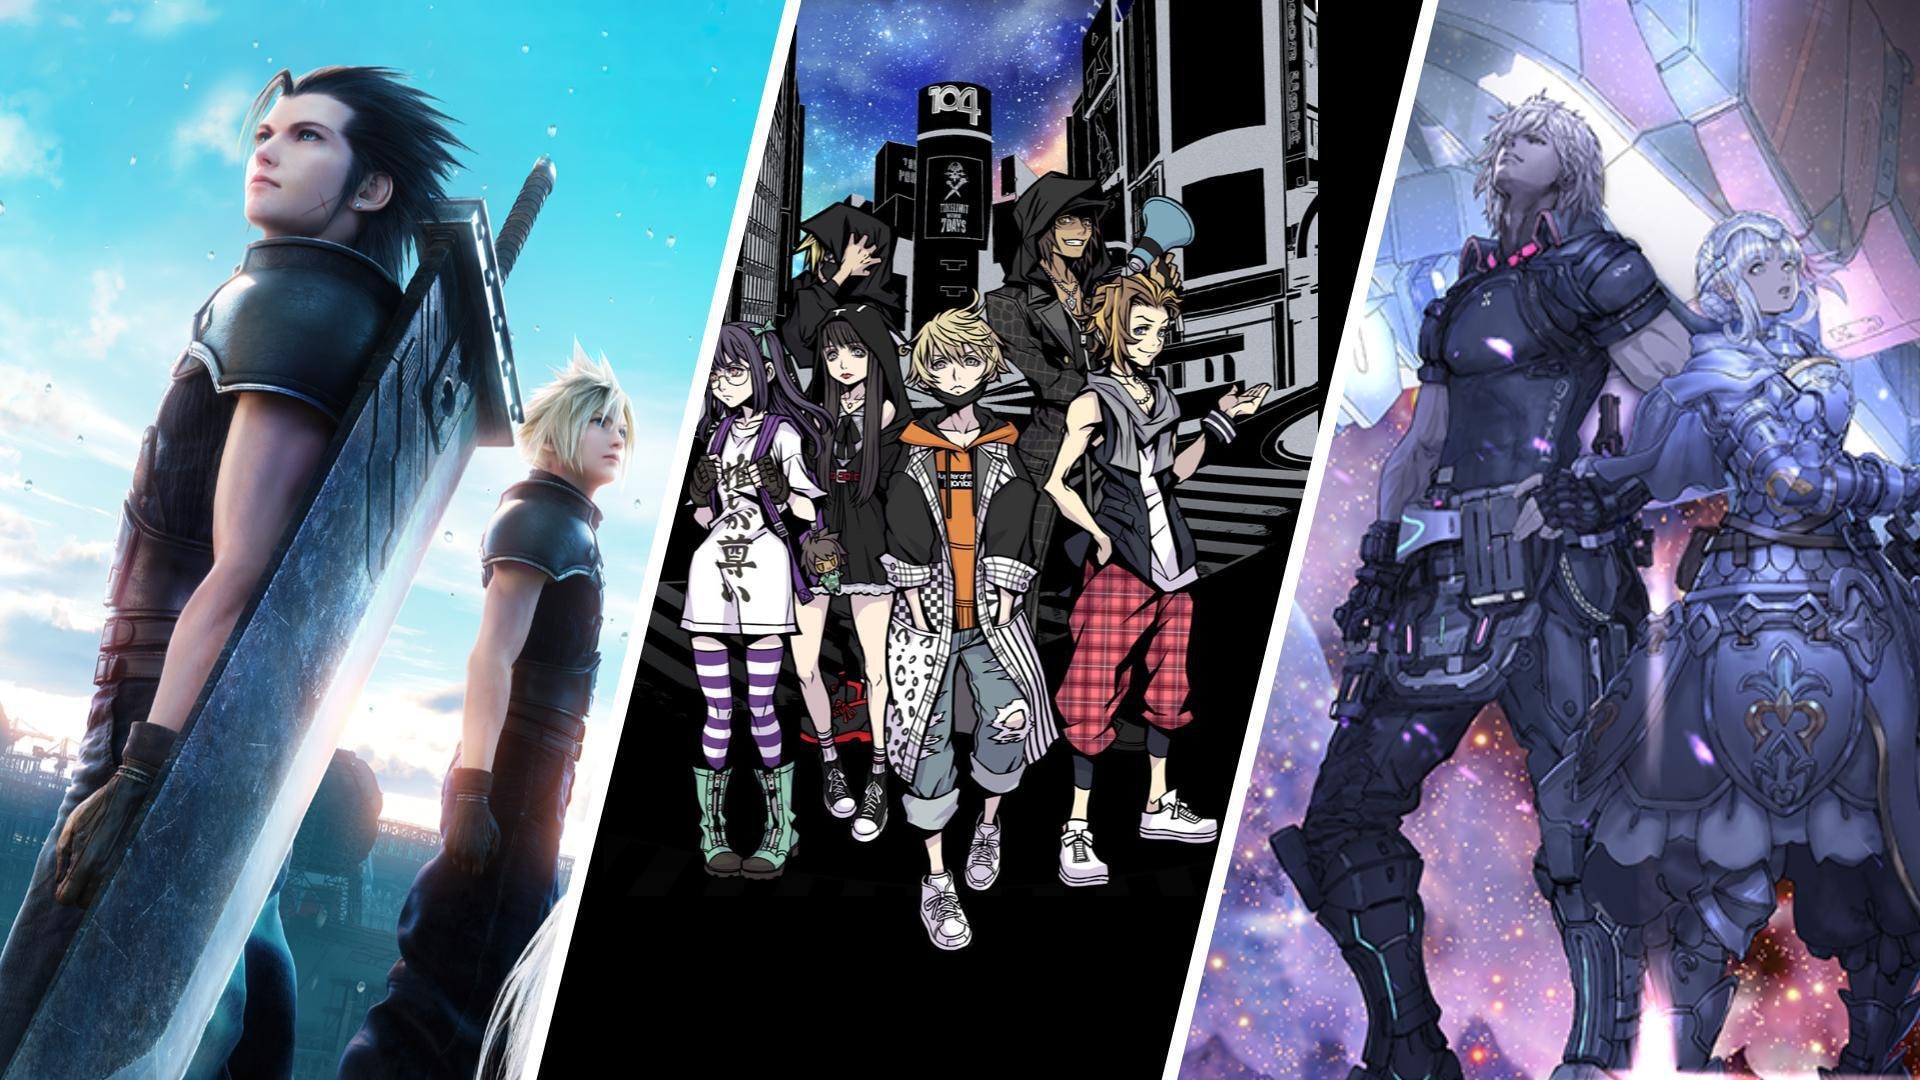 square-enix-console-games-get-price-cuts-at-amazon-and-best-buy